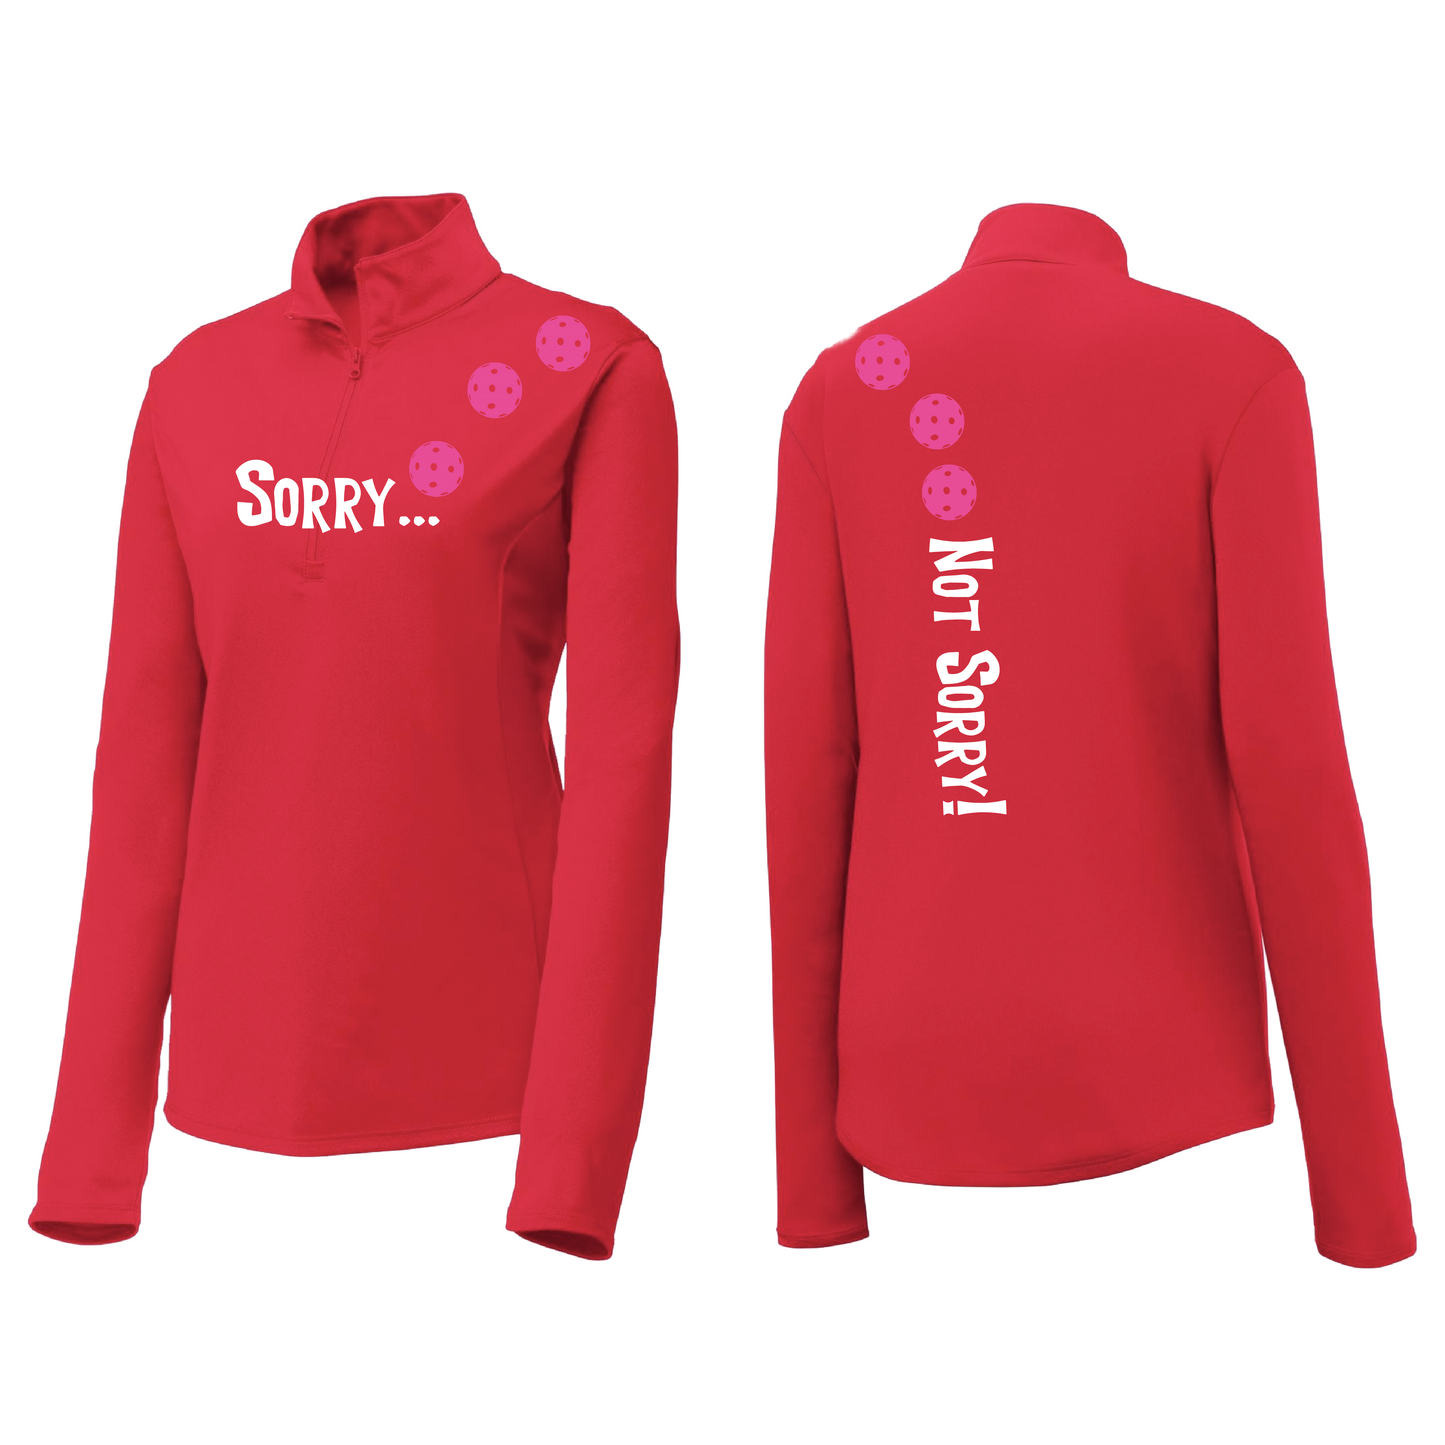 Sorry Not Sorry (Pickleball Colors Pink Rainbow Red) Customizable | Women's 1/4 Zip Pullover Pickleball Shirt | 100% Polyester